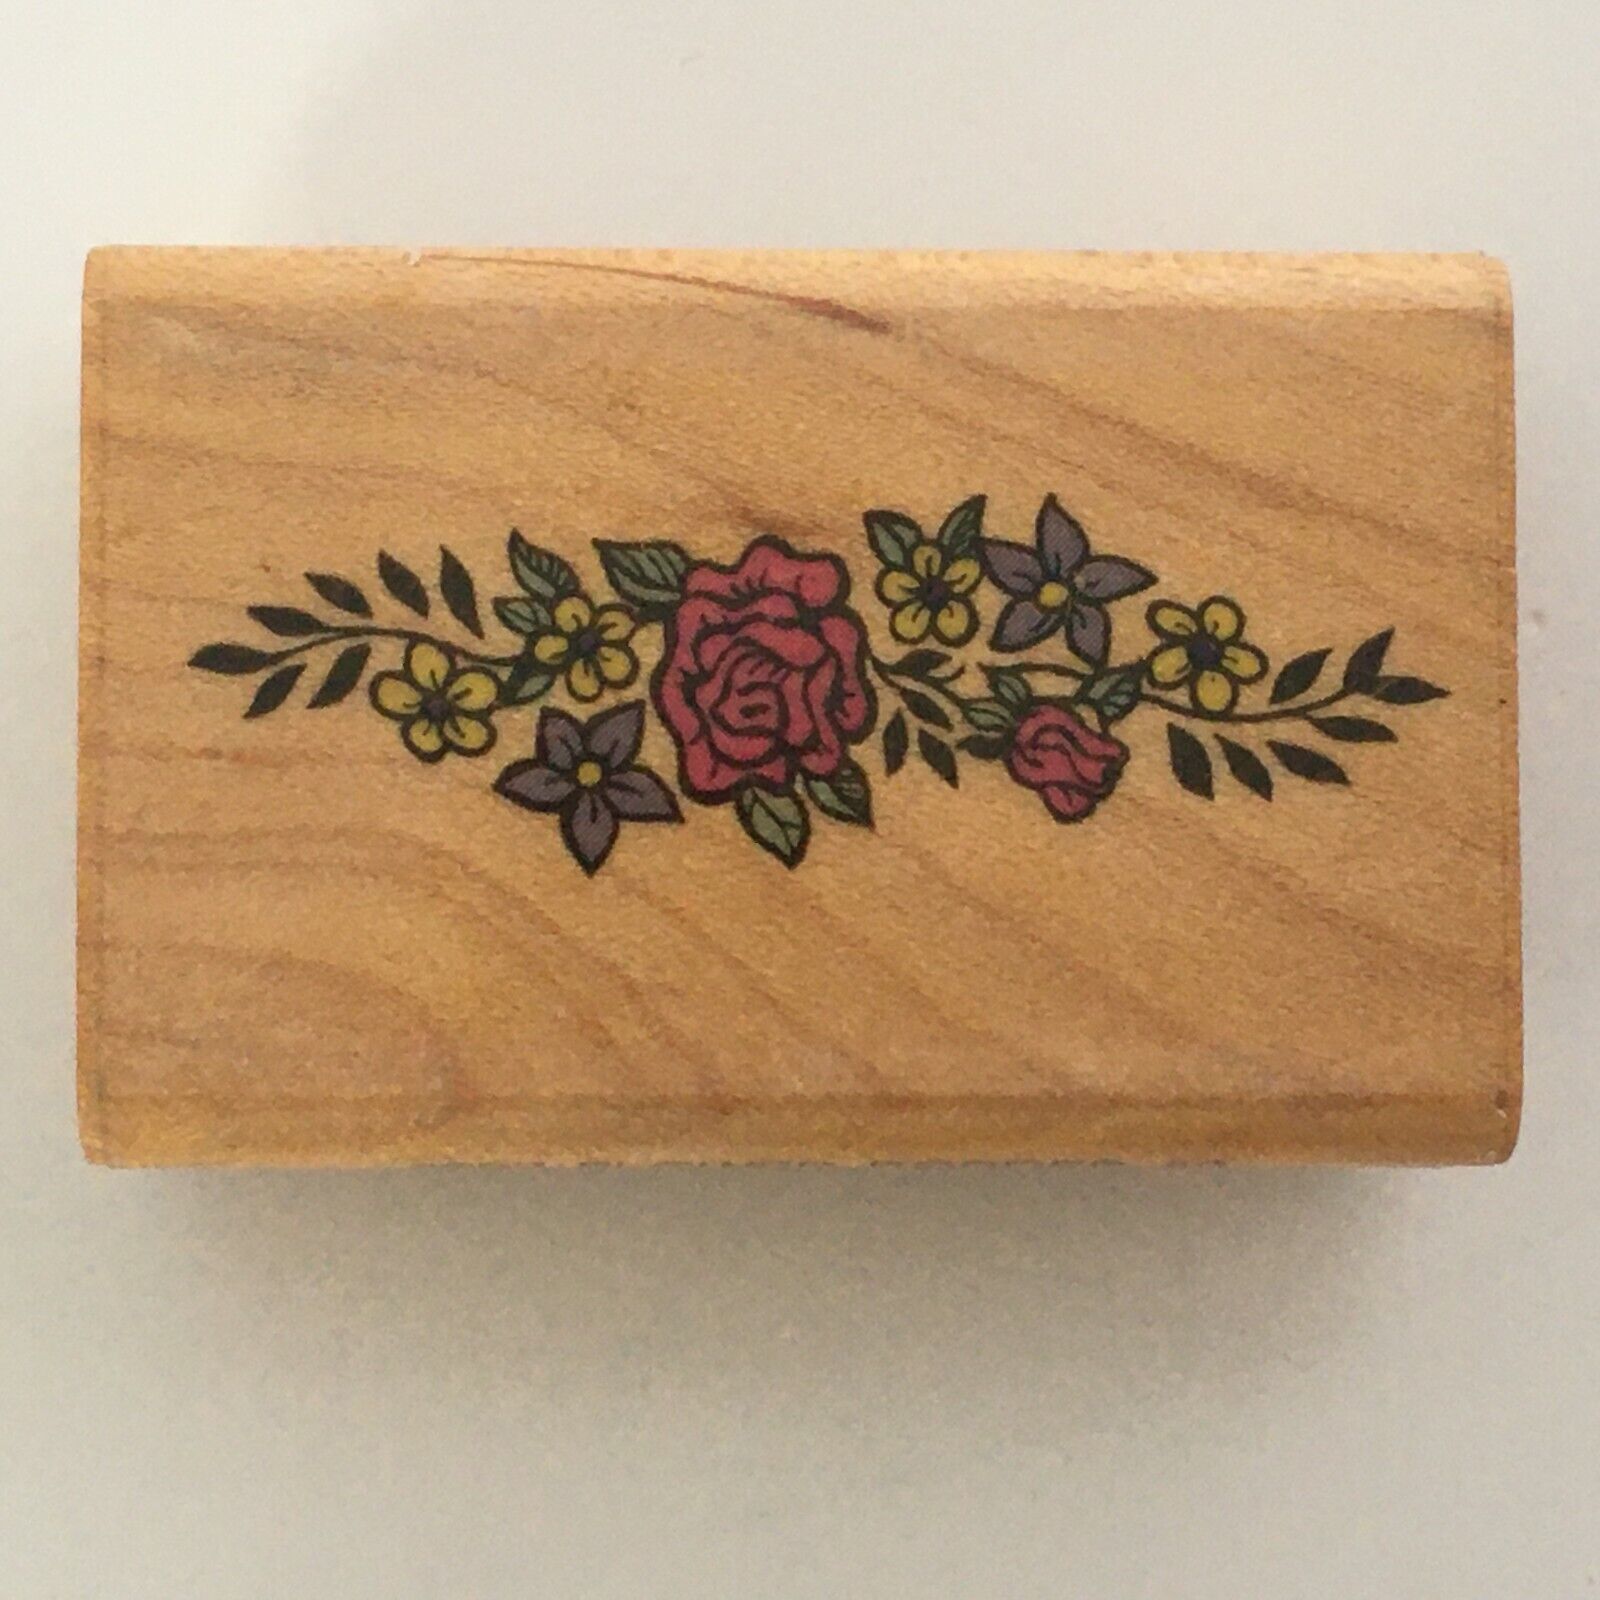 Primary image for Comotion Rubber Stamp Flower Border Small Pretty Card Making Paper Crafting 697